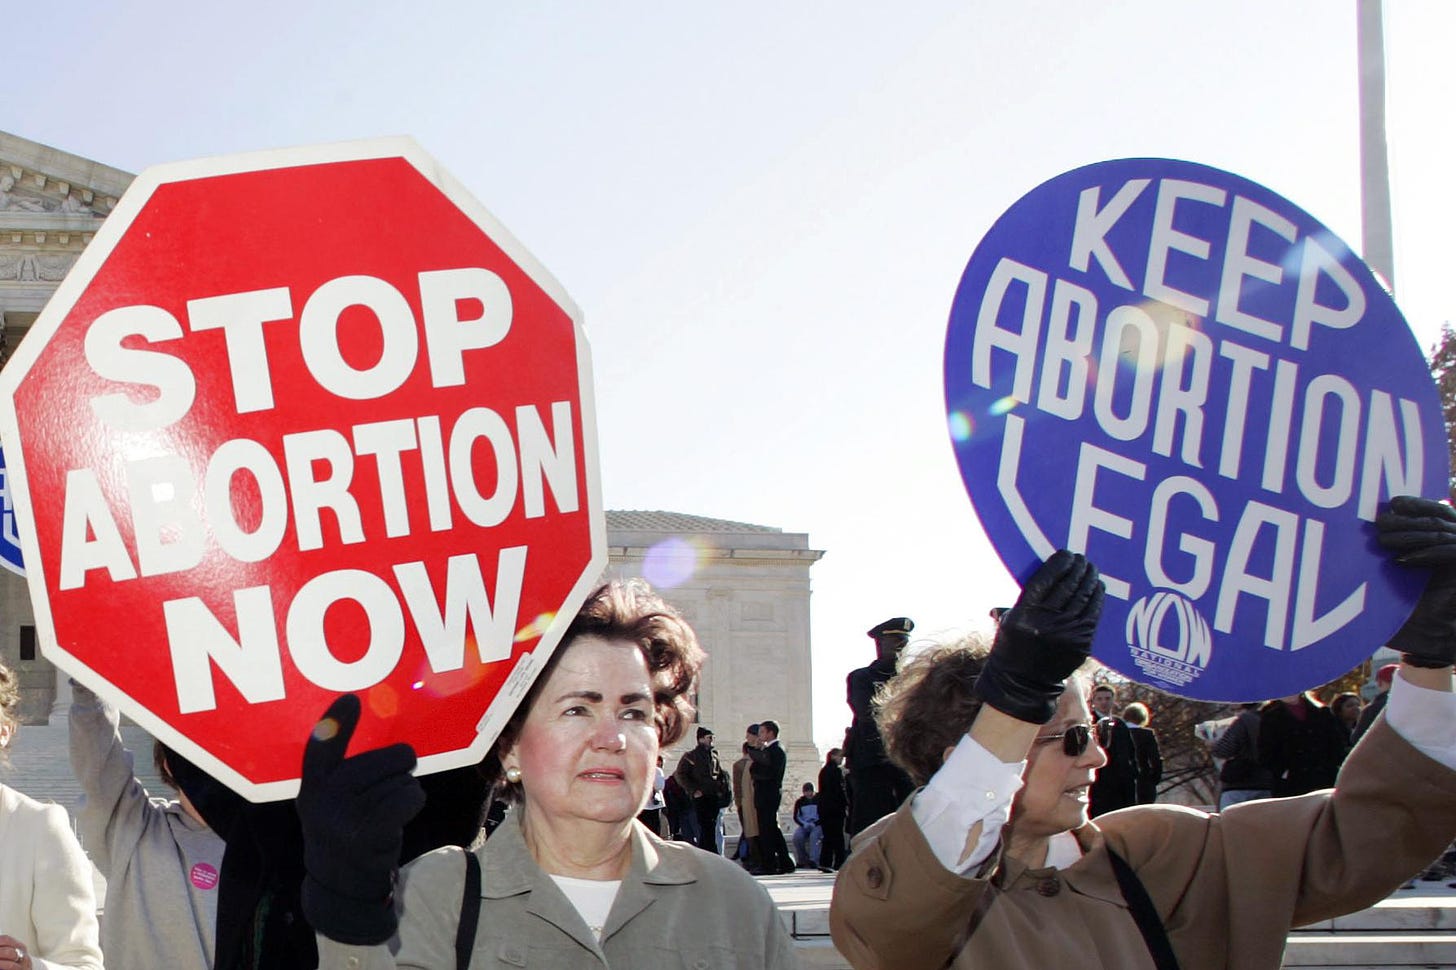 AP-NORC poll: Most say restrict abortion after 1st trimester | AP News